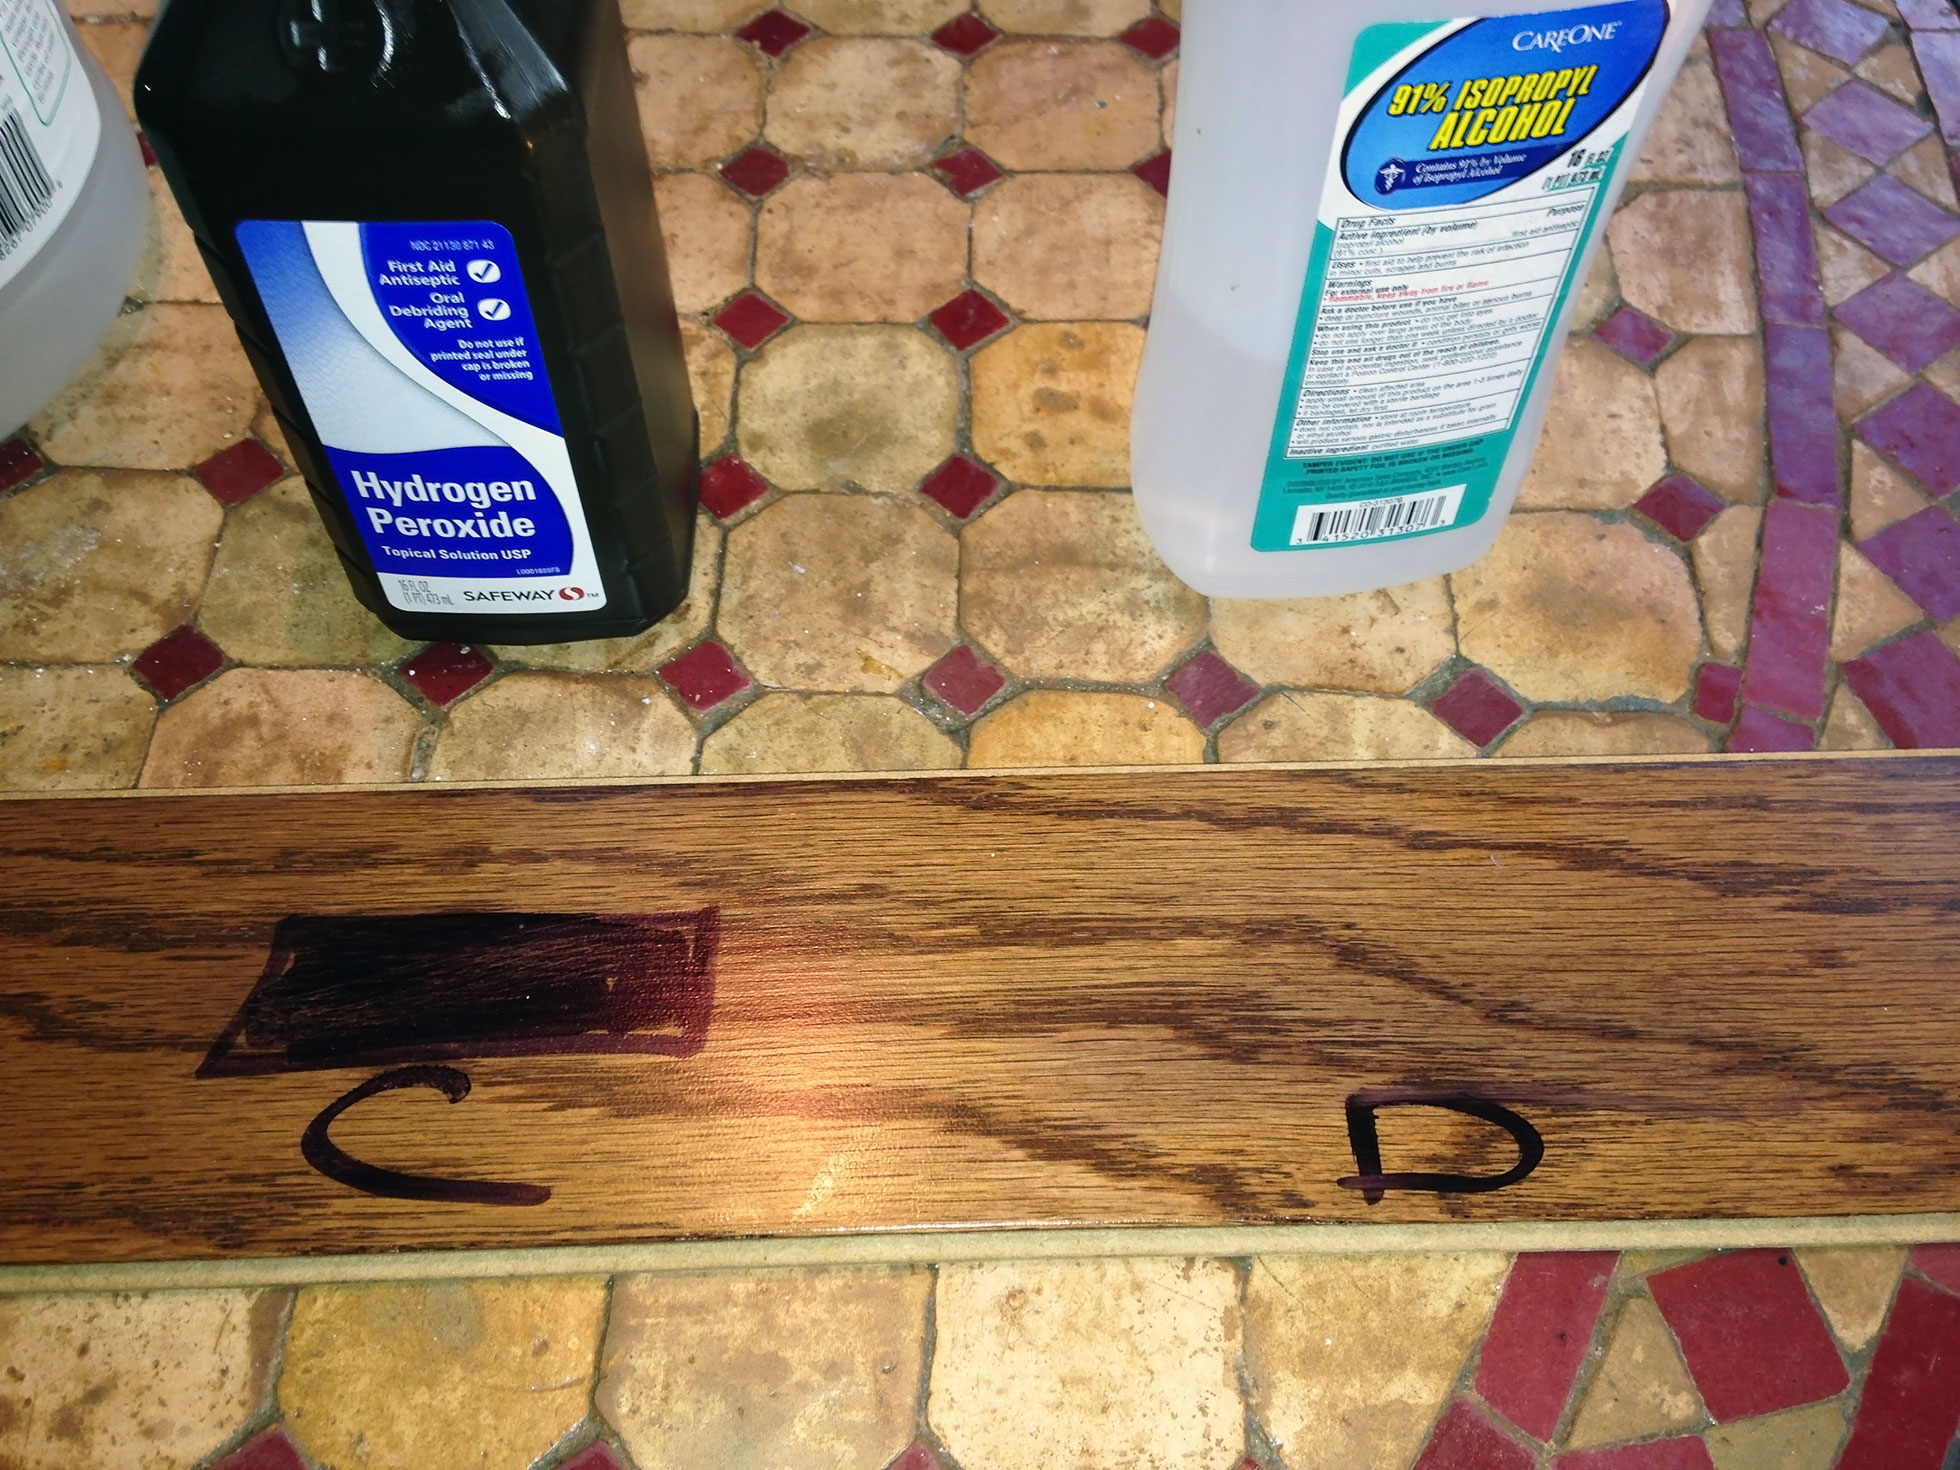 After DIY floor cleaner test with wood and alcohol